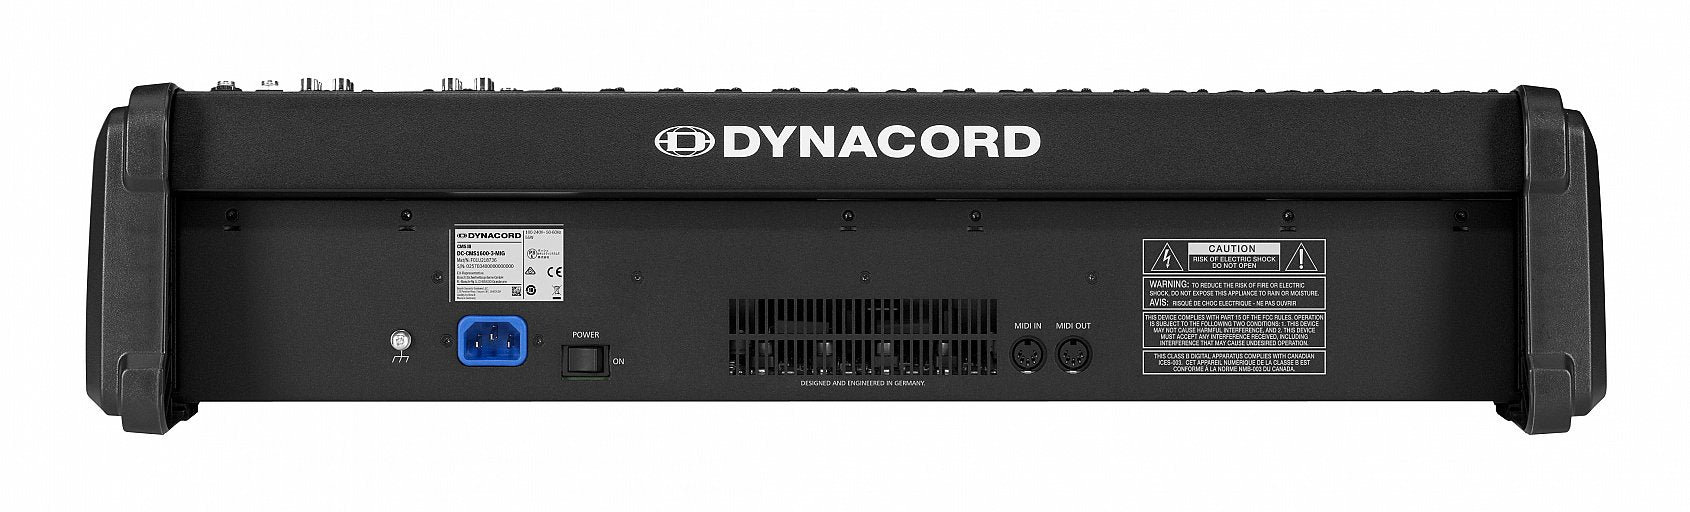 Dynacord CMS1600-3 16 Channel Compact Mixing System - Each